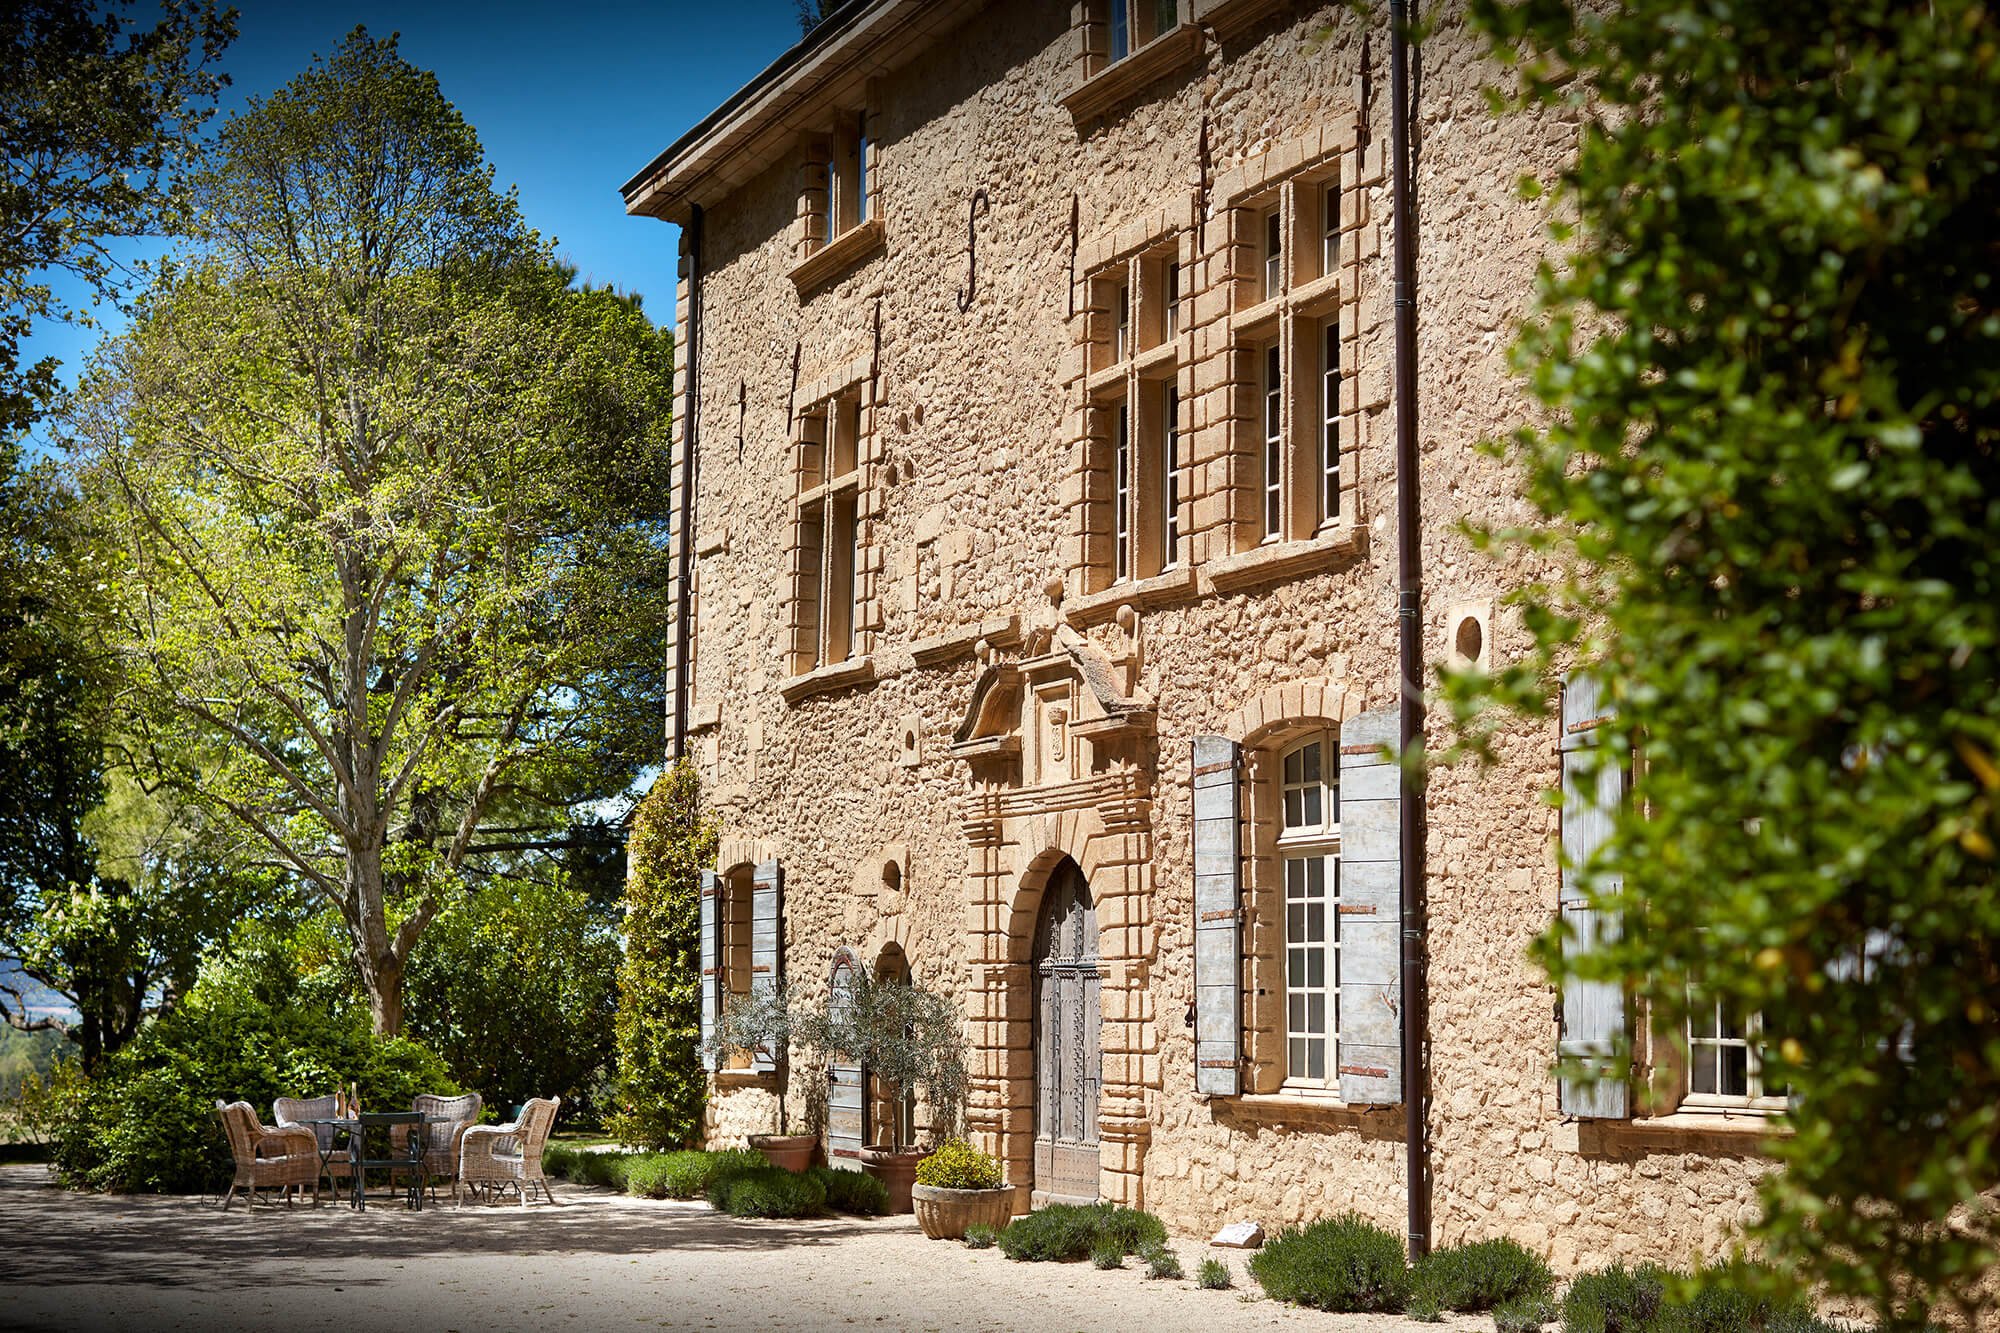 An exceptional Provencal château in the Luberon region, ideal for corporate seminars and teambuilding activities.